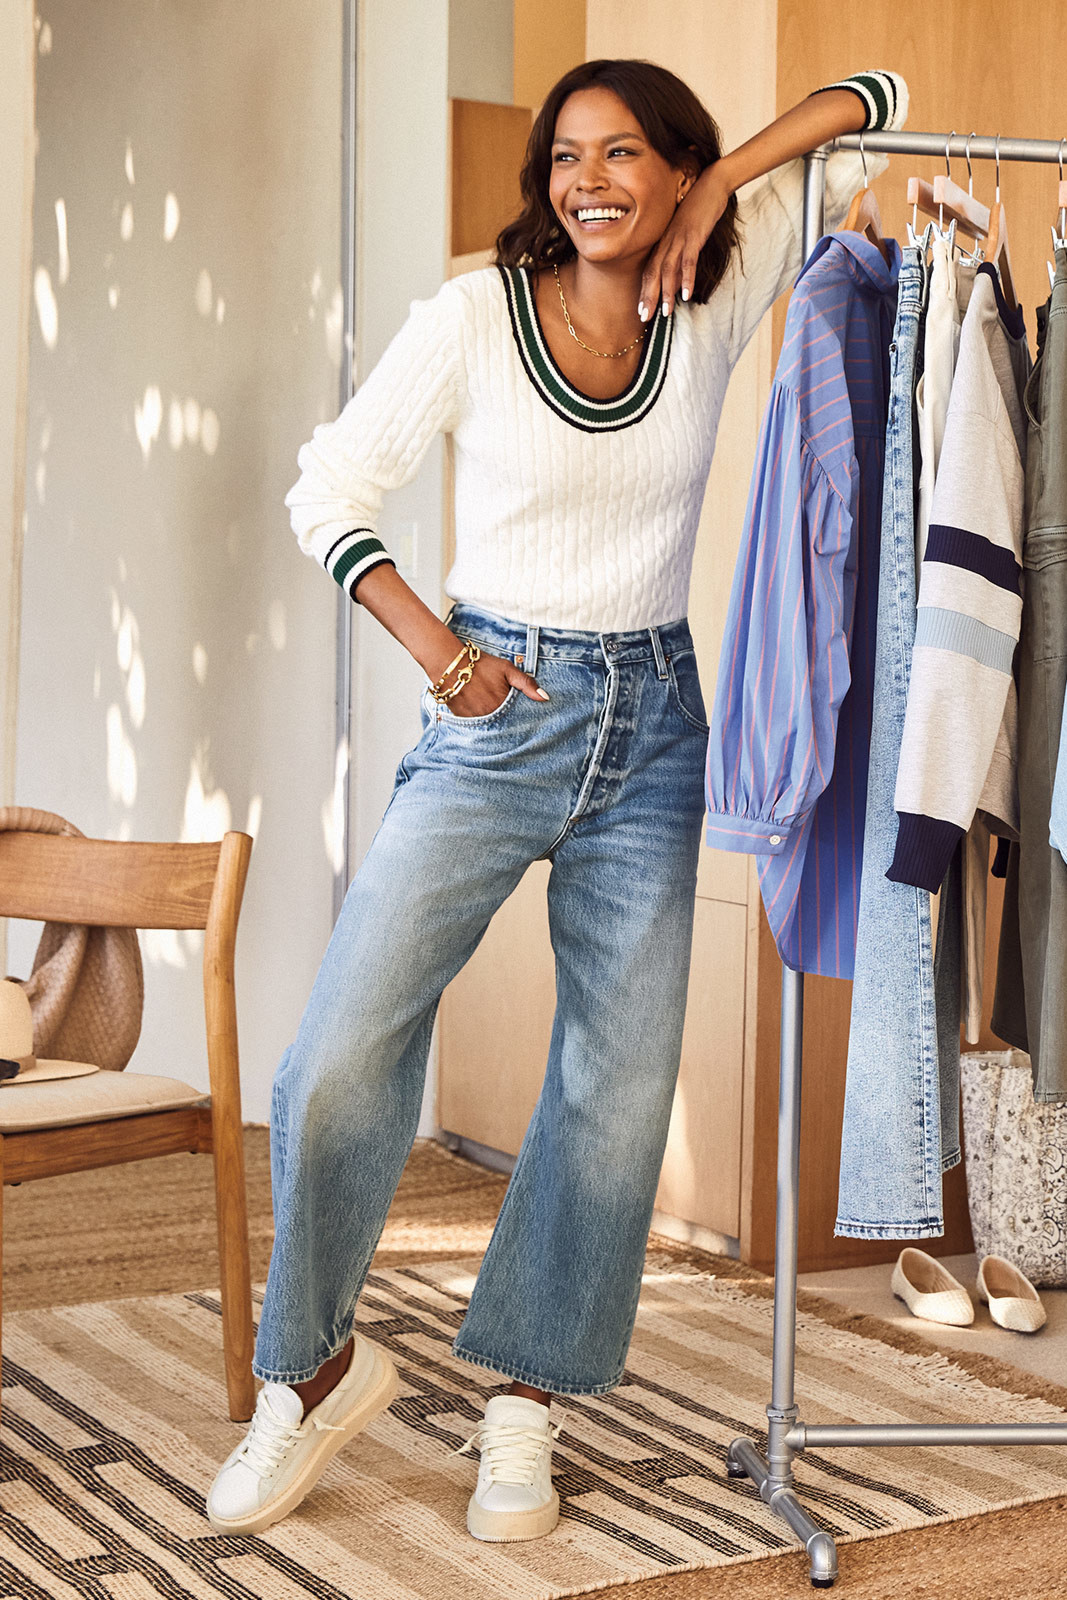 Horseshoe, Gaucho & Balloon Jeans Trend - THE JEANS BLOG